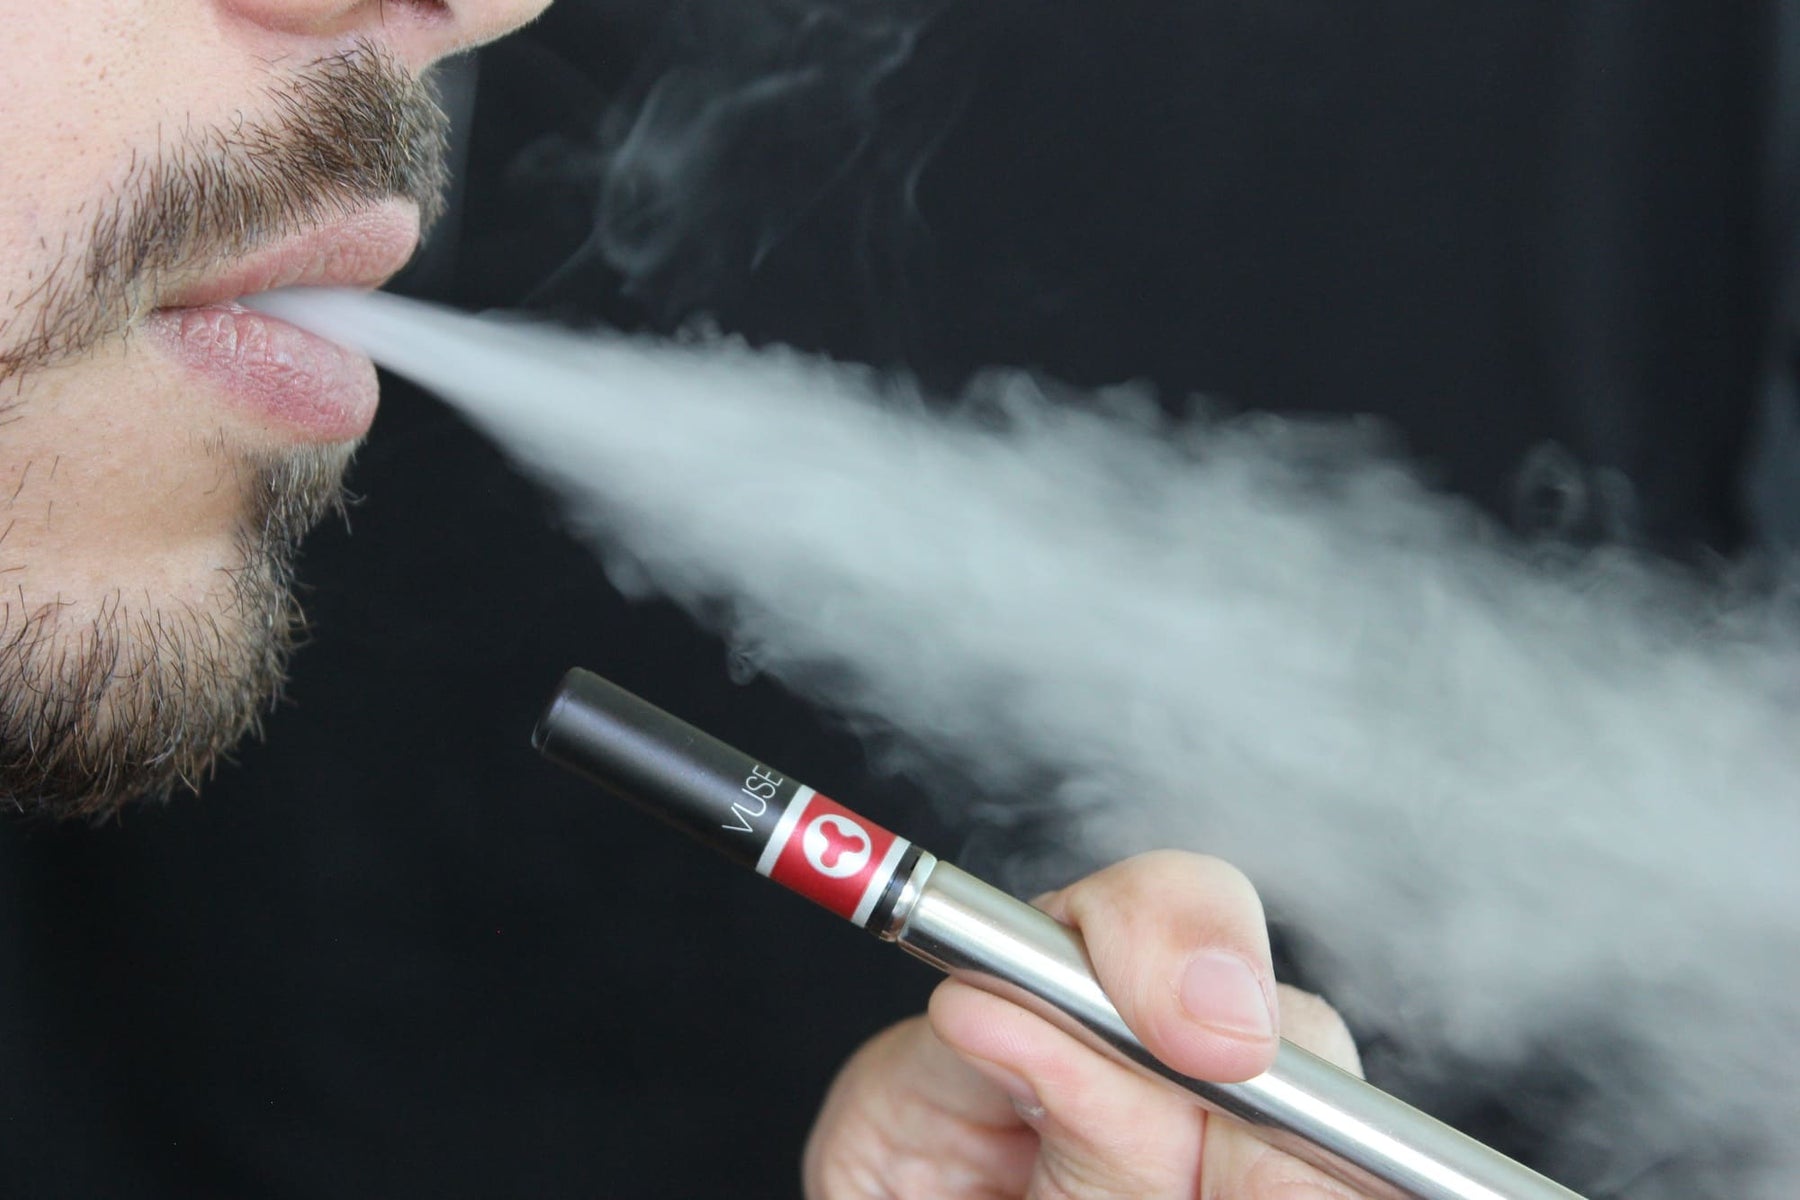 Cough When You Vape? Here's How to Stop It